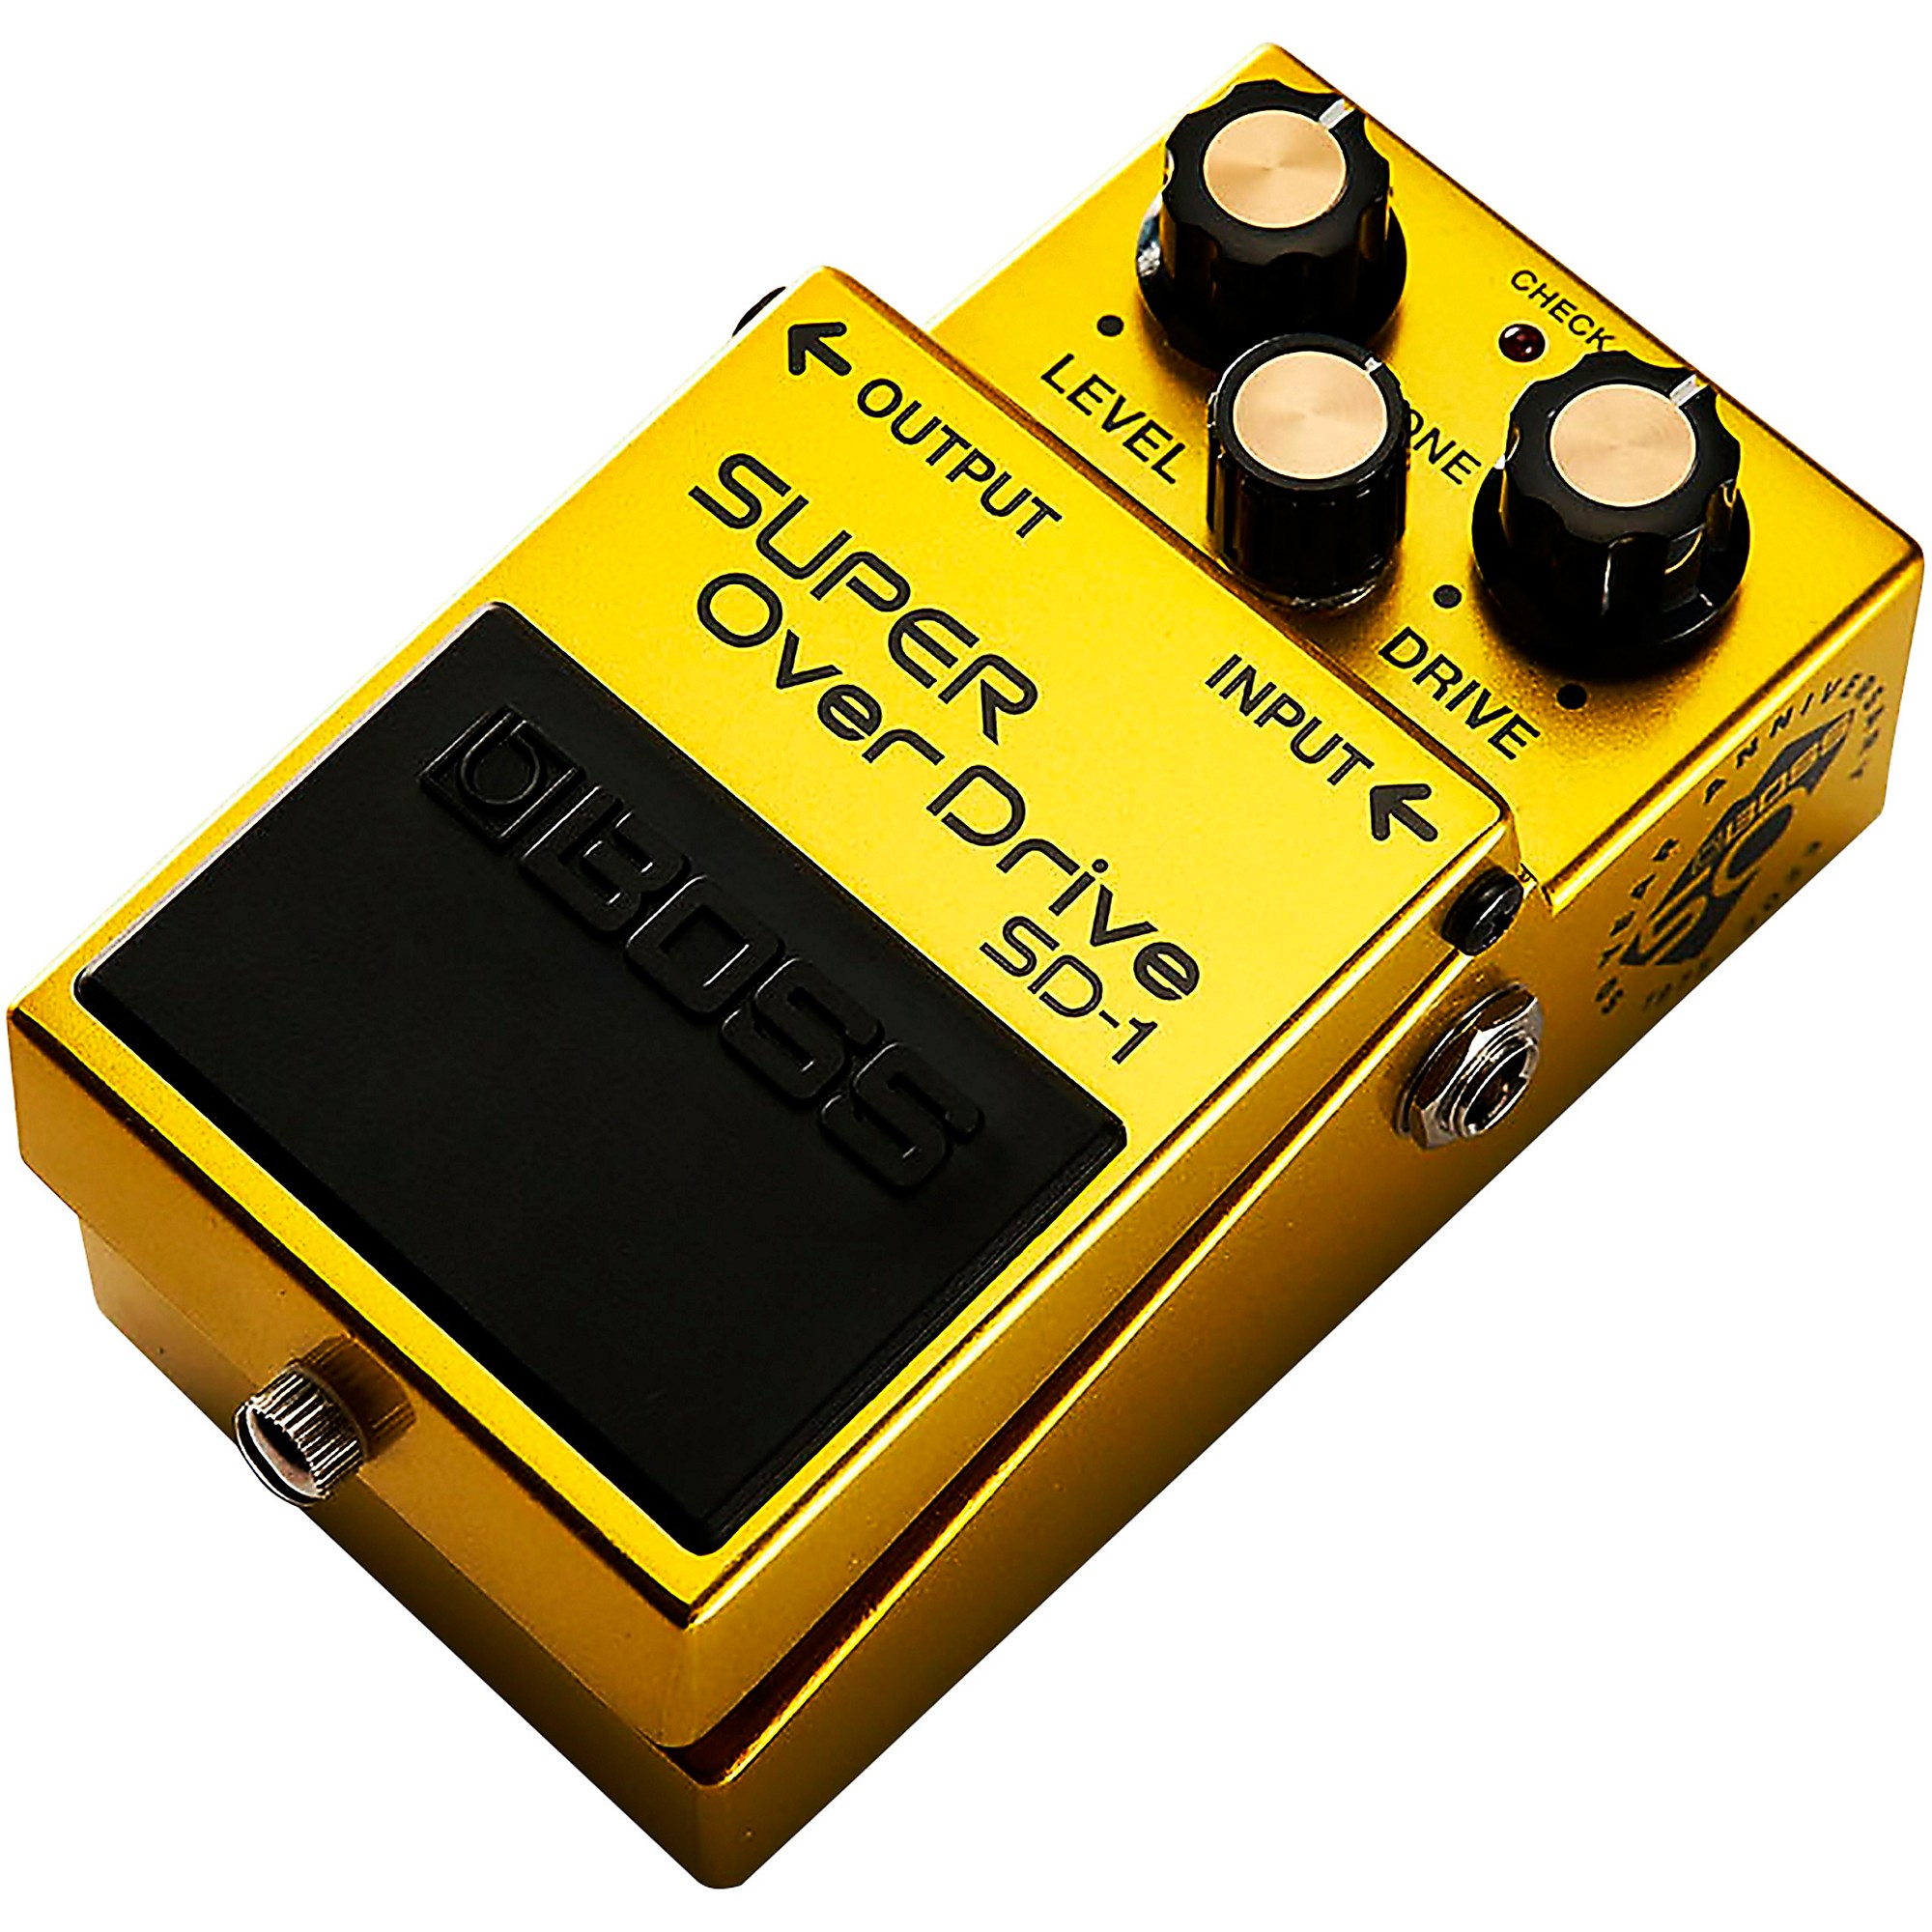 BOSS SD-1-B50A Super Overdrive 50th Anniversary Effects Pedal